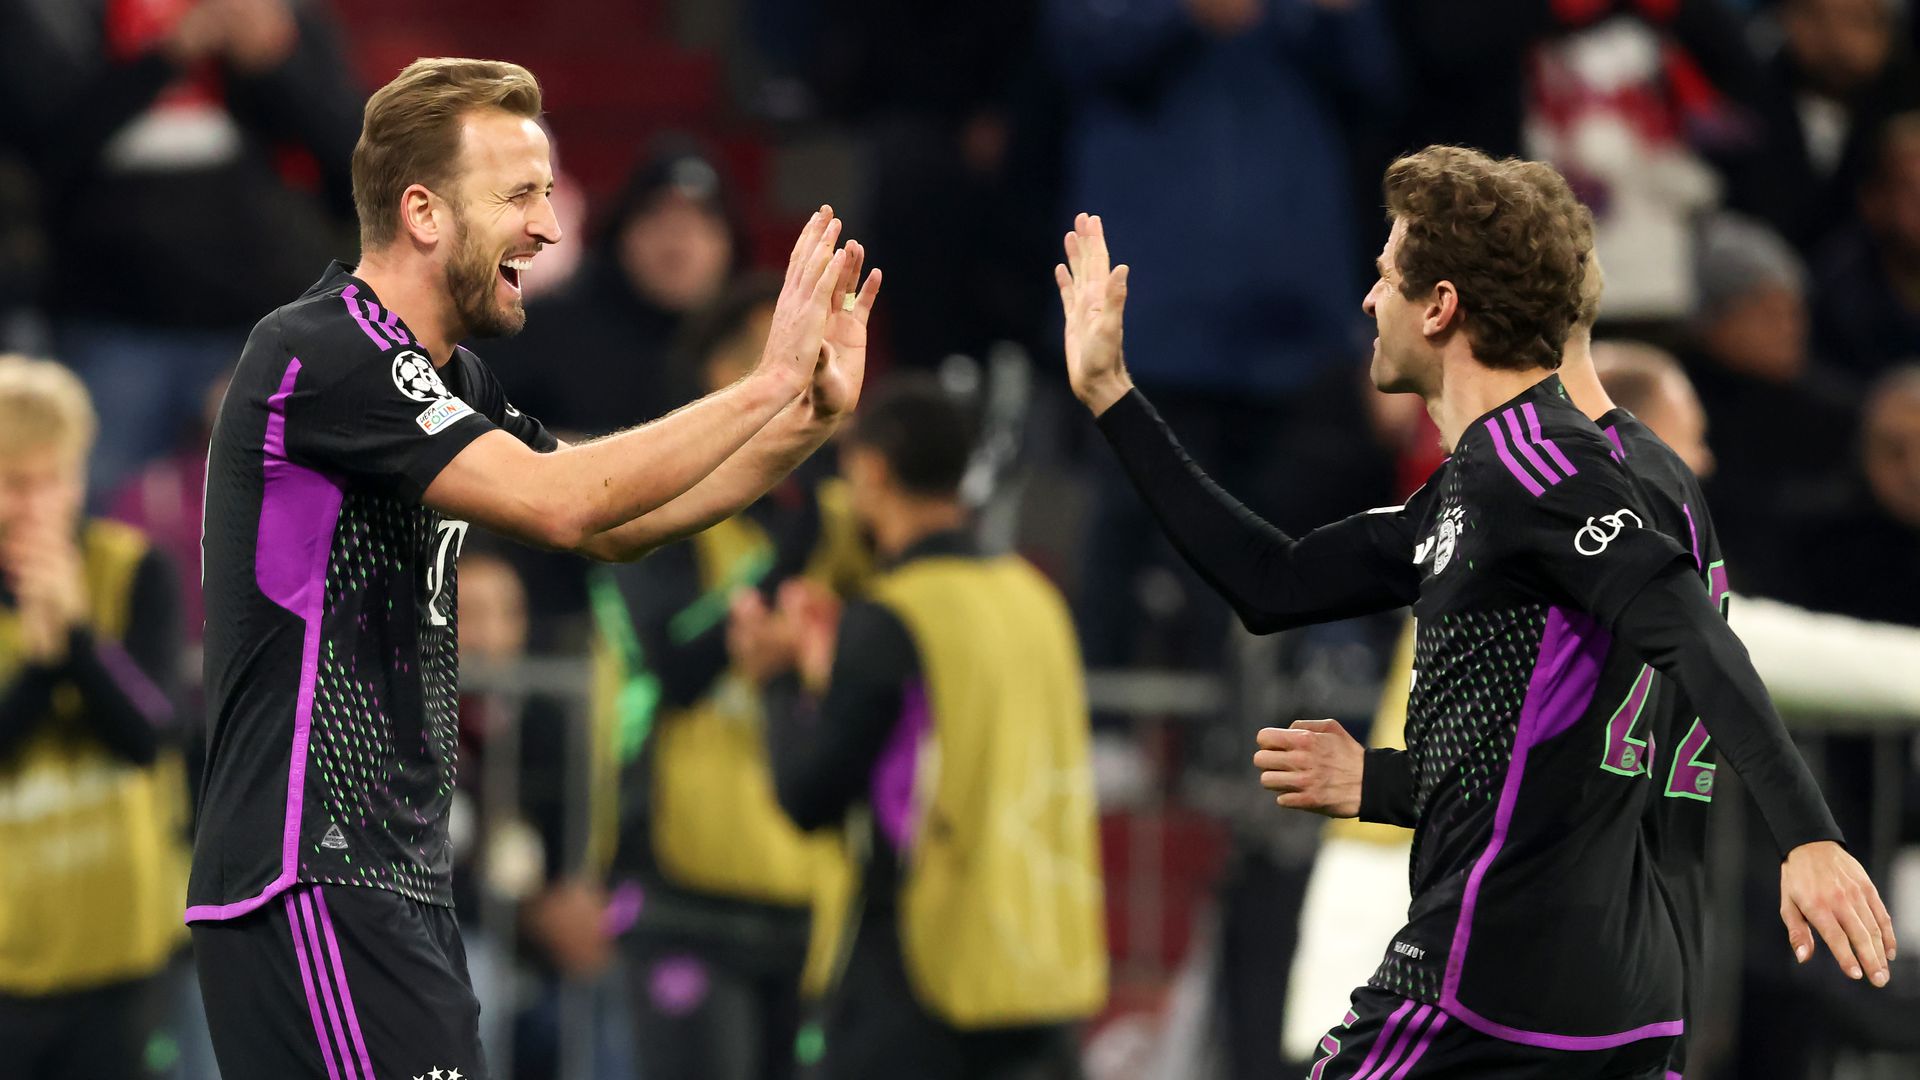 harry kane ecstatic for thomas müller’s new contract extension at bayern munich